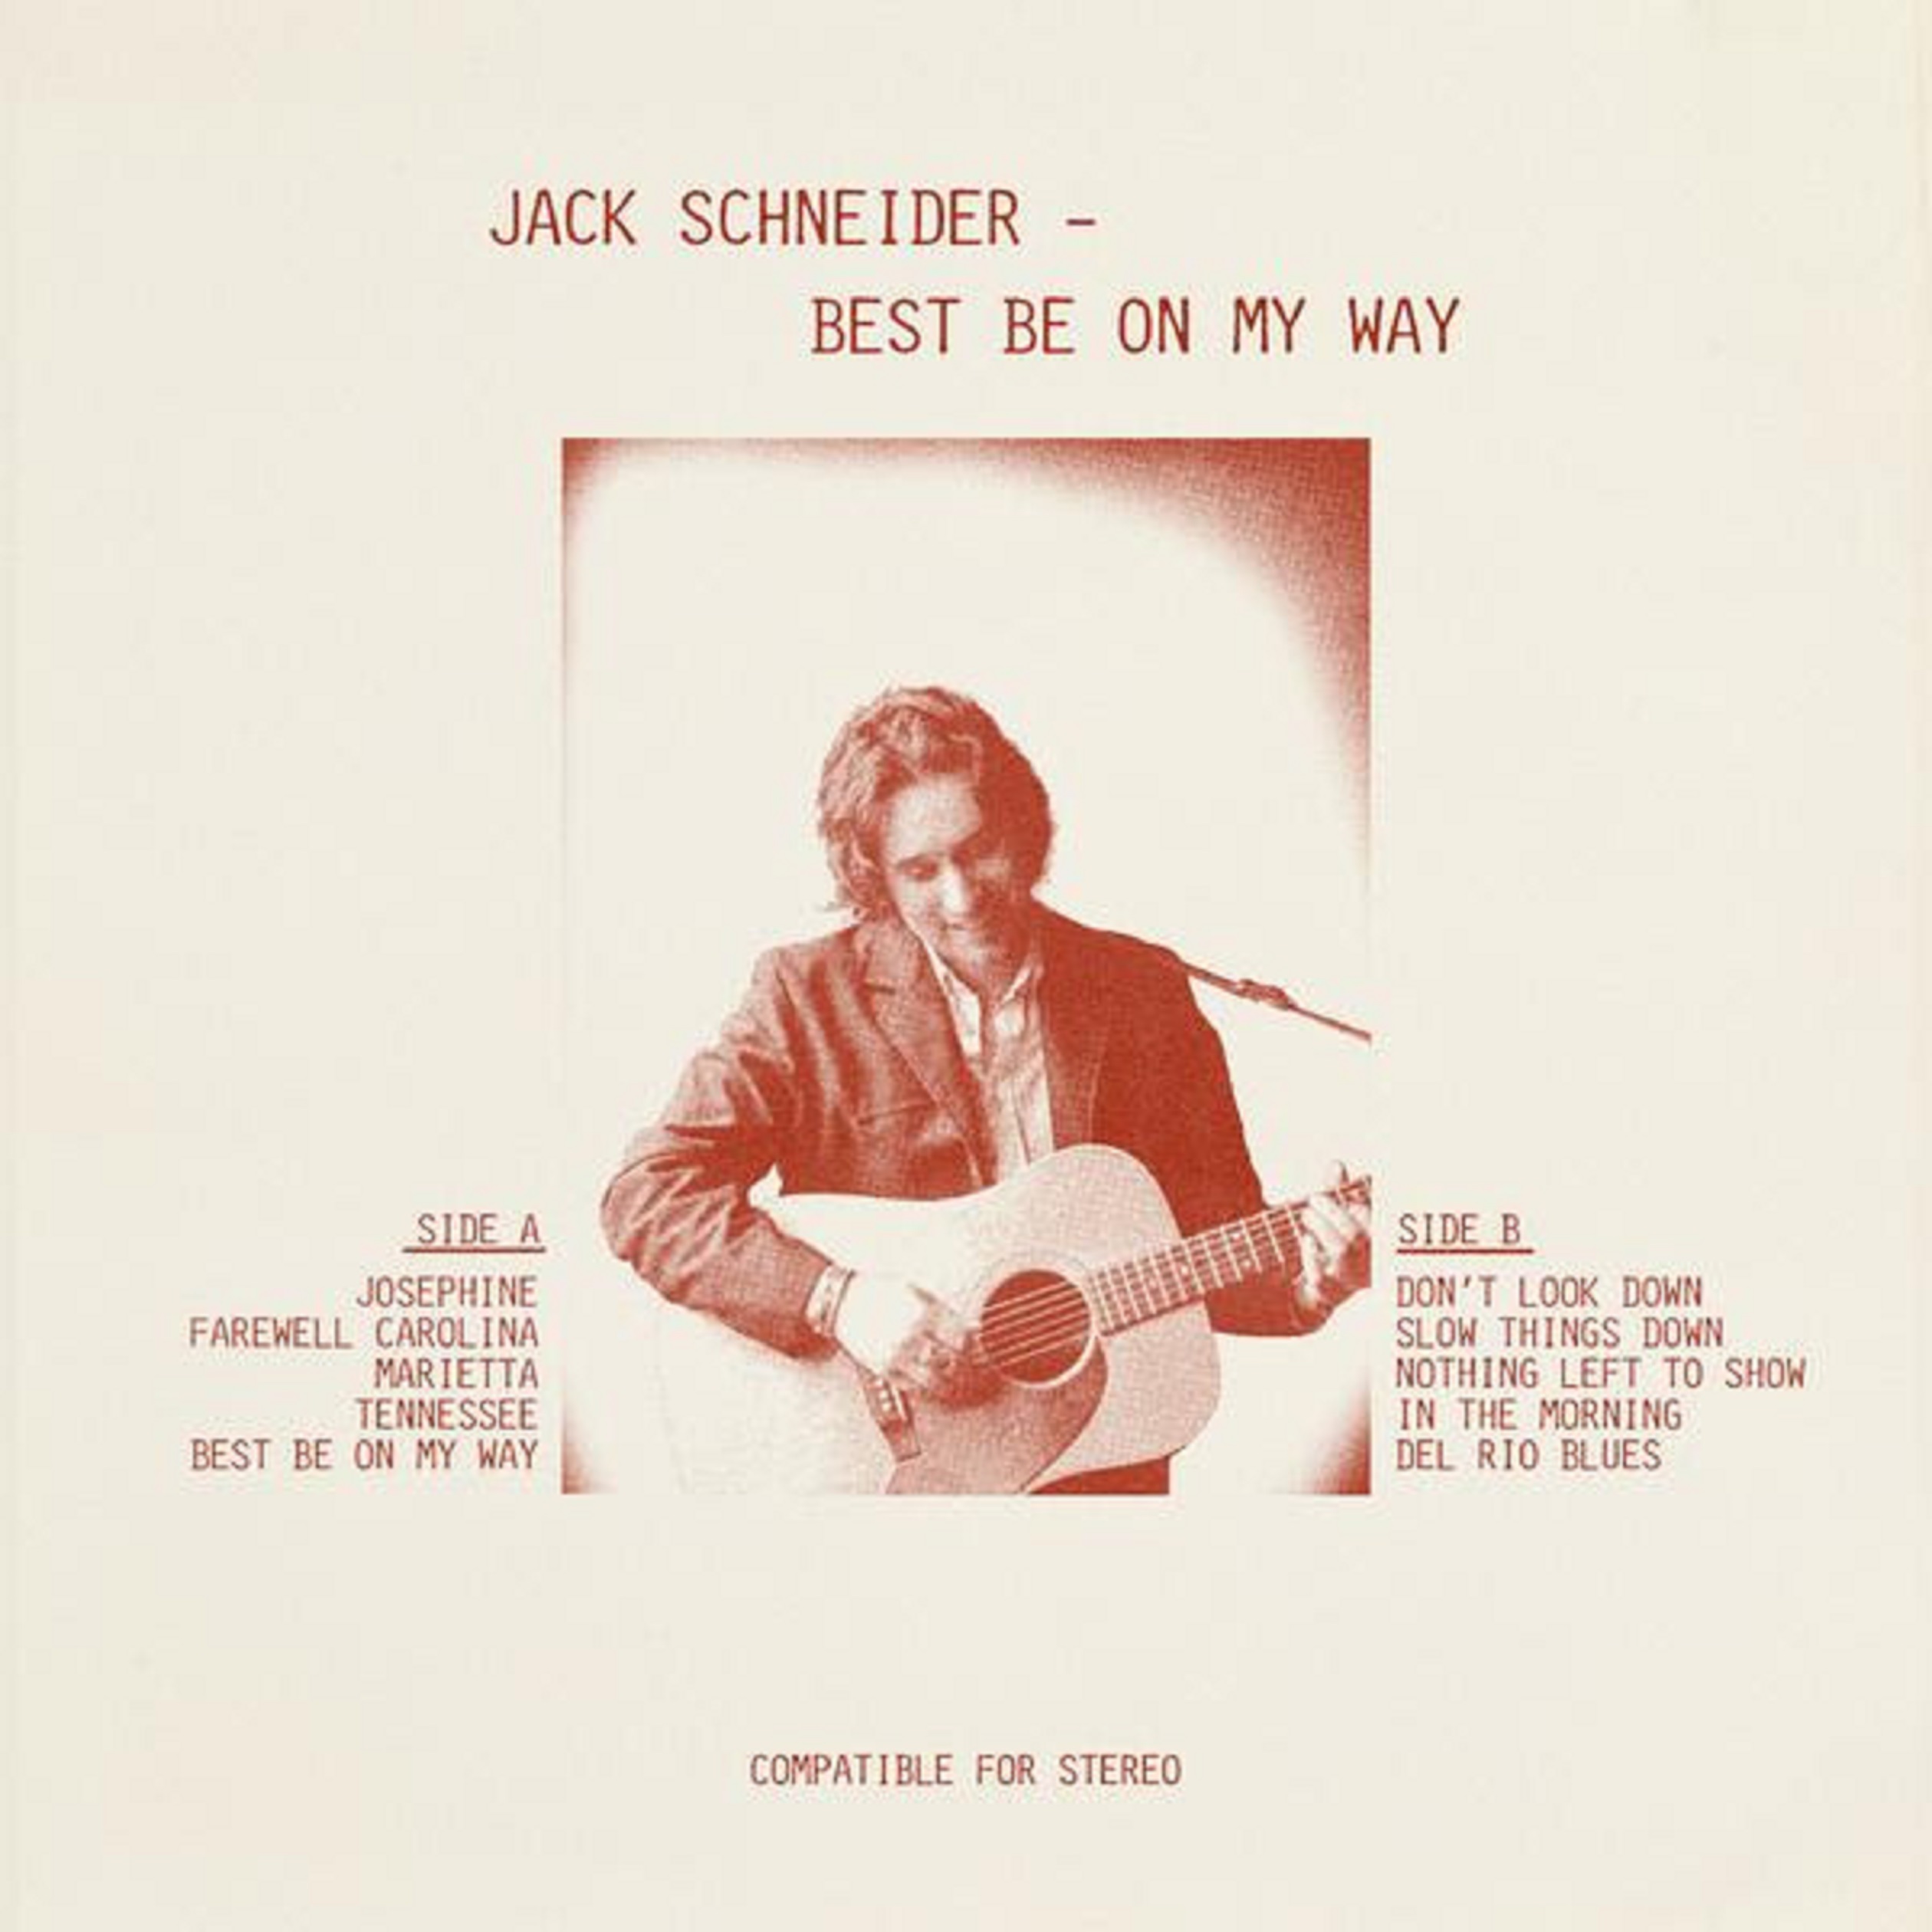 Jack Schneider’s inaugural record is a testament to tradition, timelessness, and the modern relevance of old ways